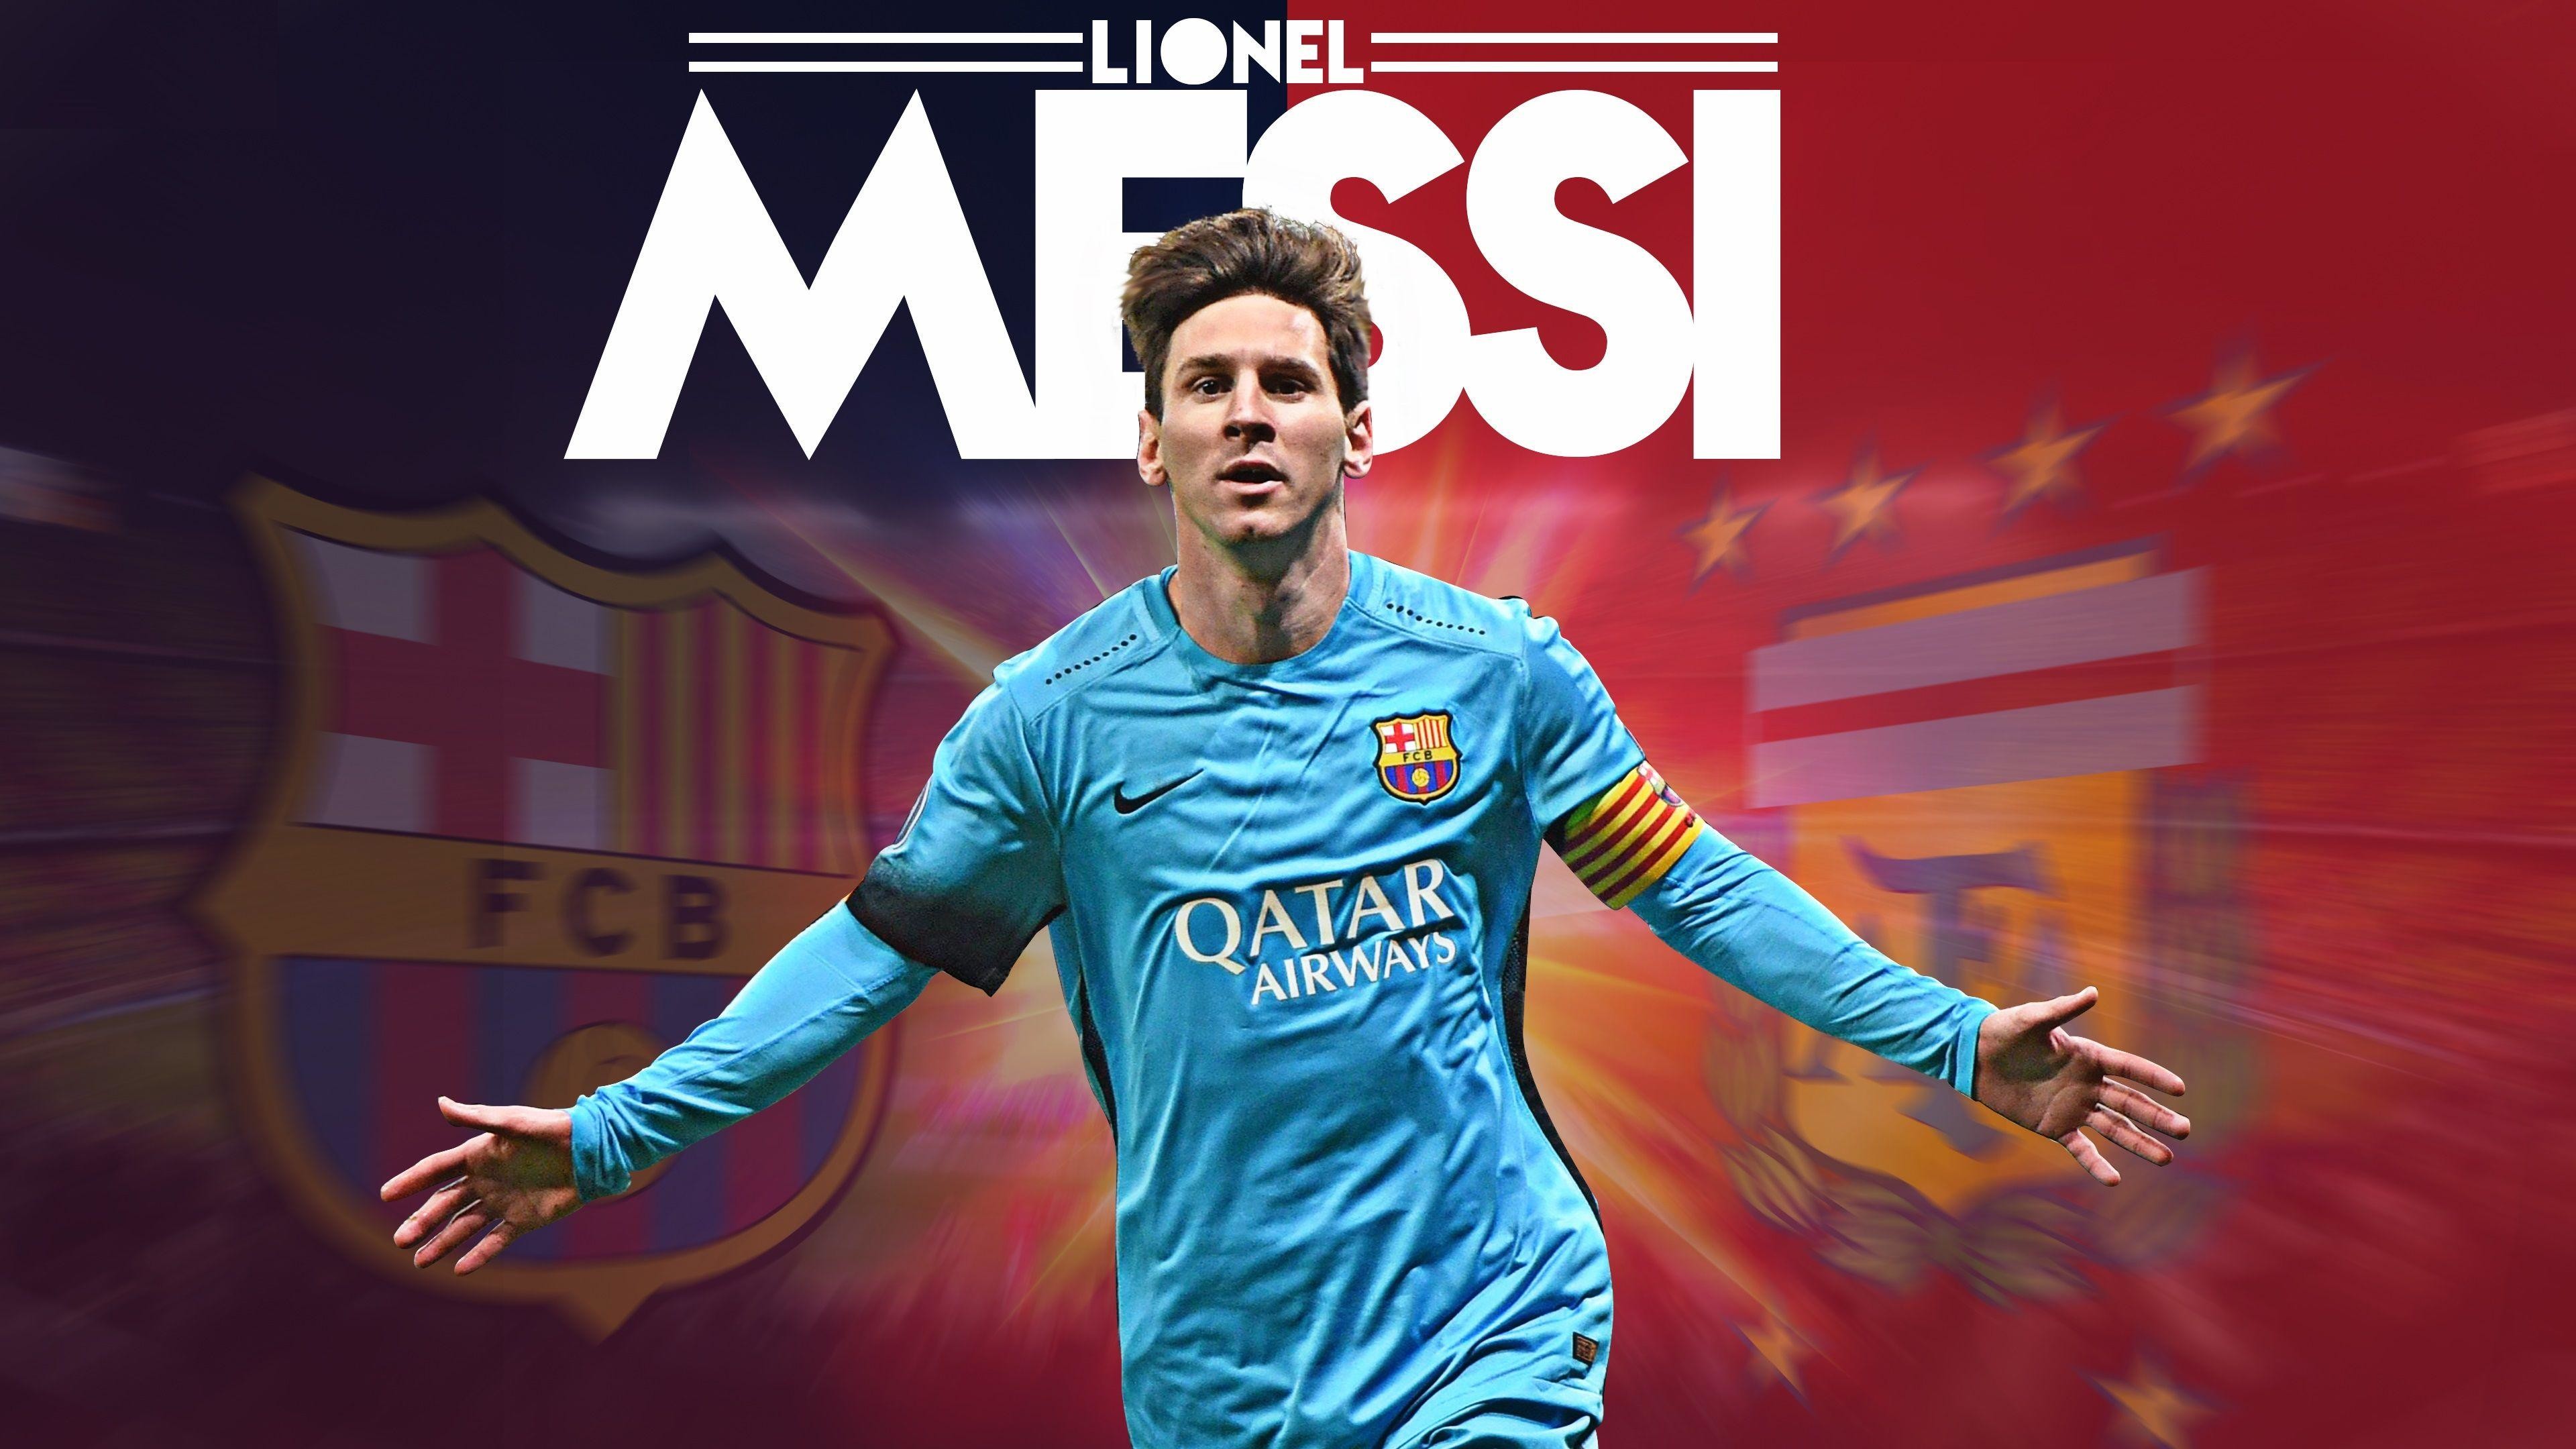 3840x2160 High Quality Wallpapers of Lionel Messi FC Barcelona